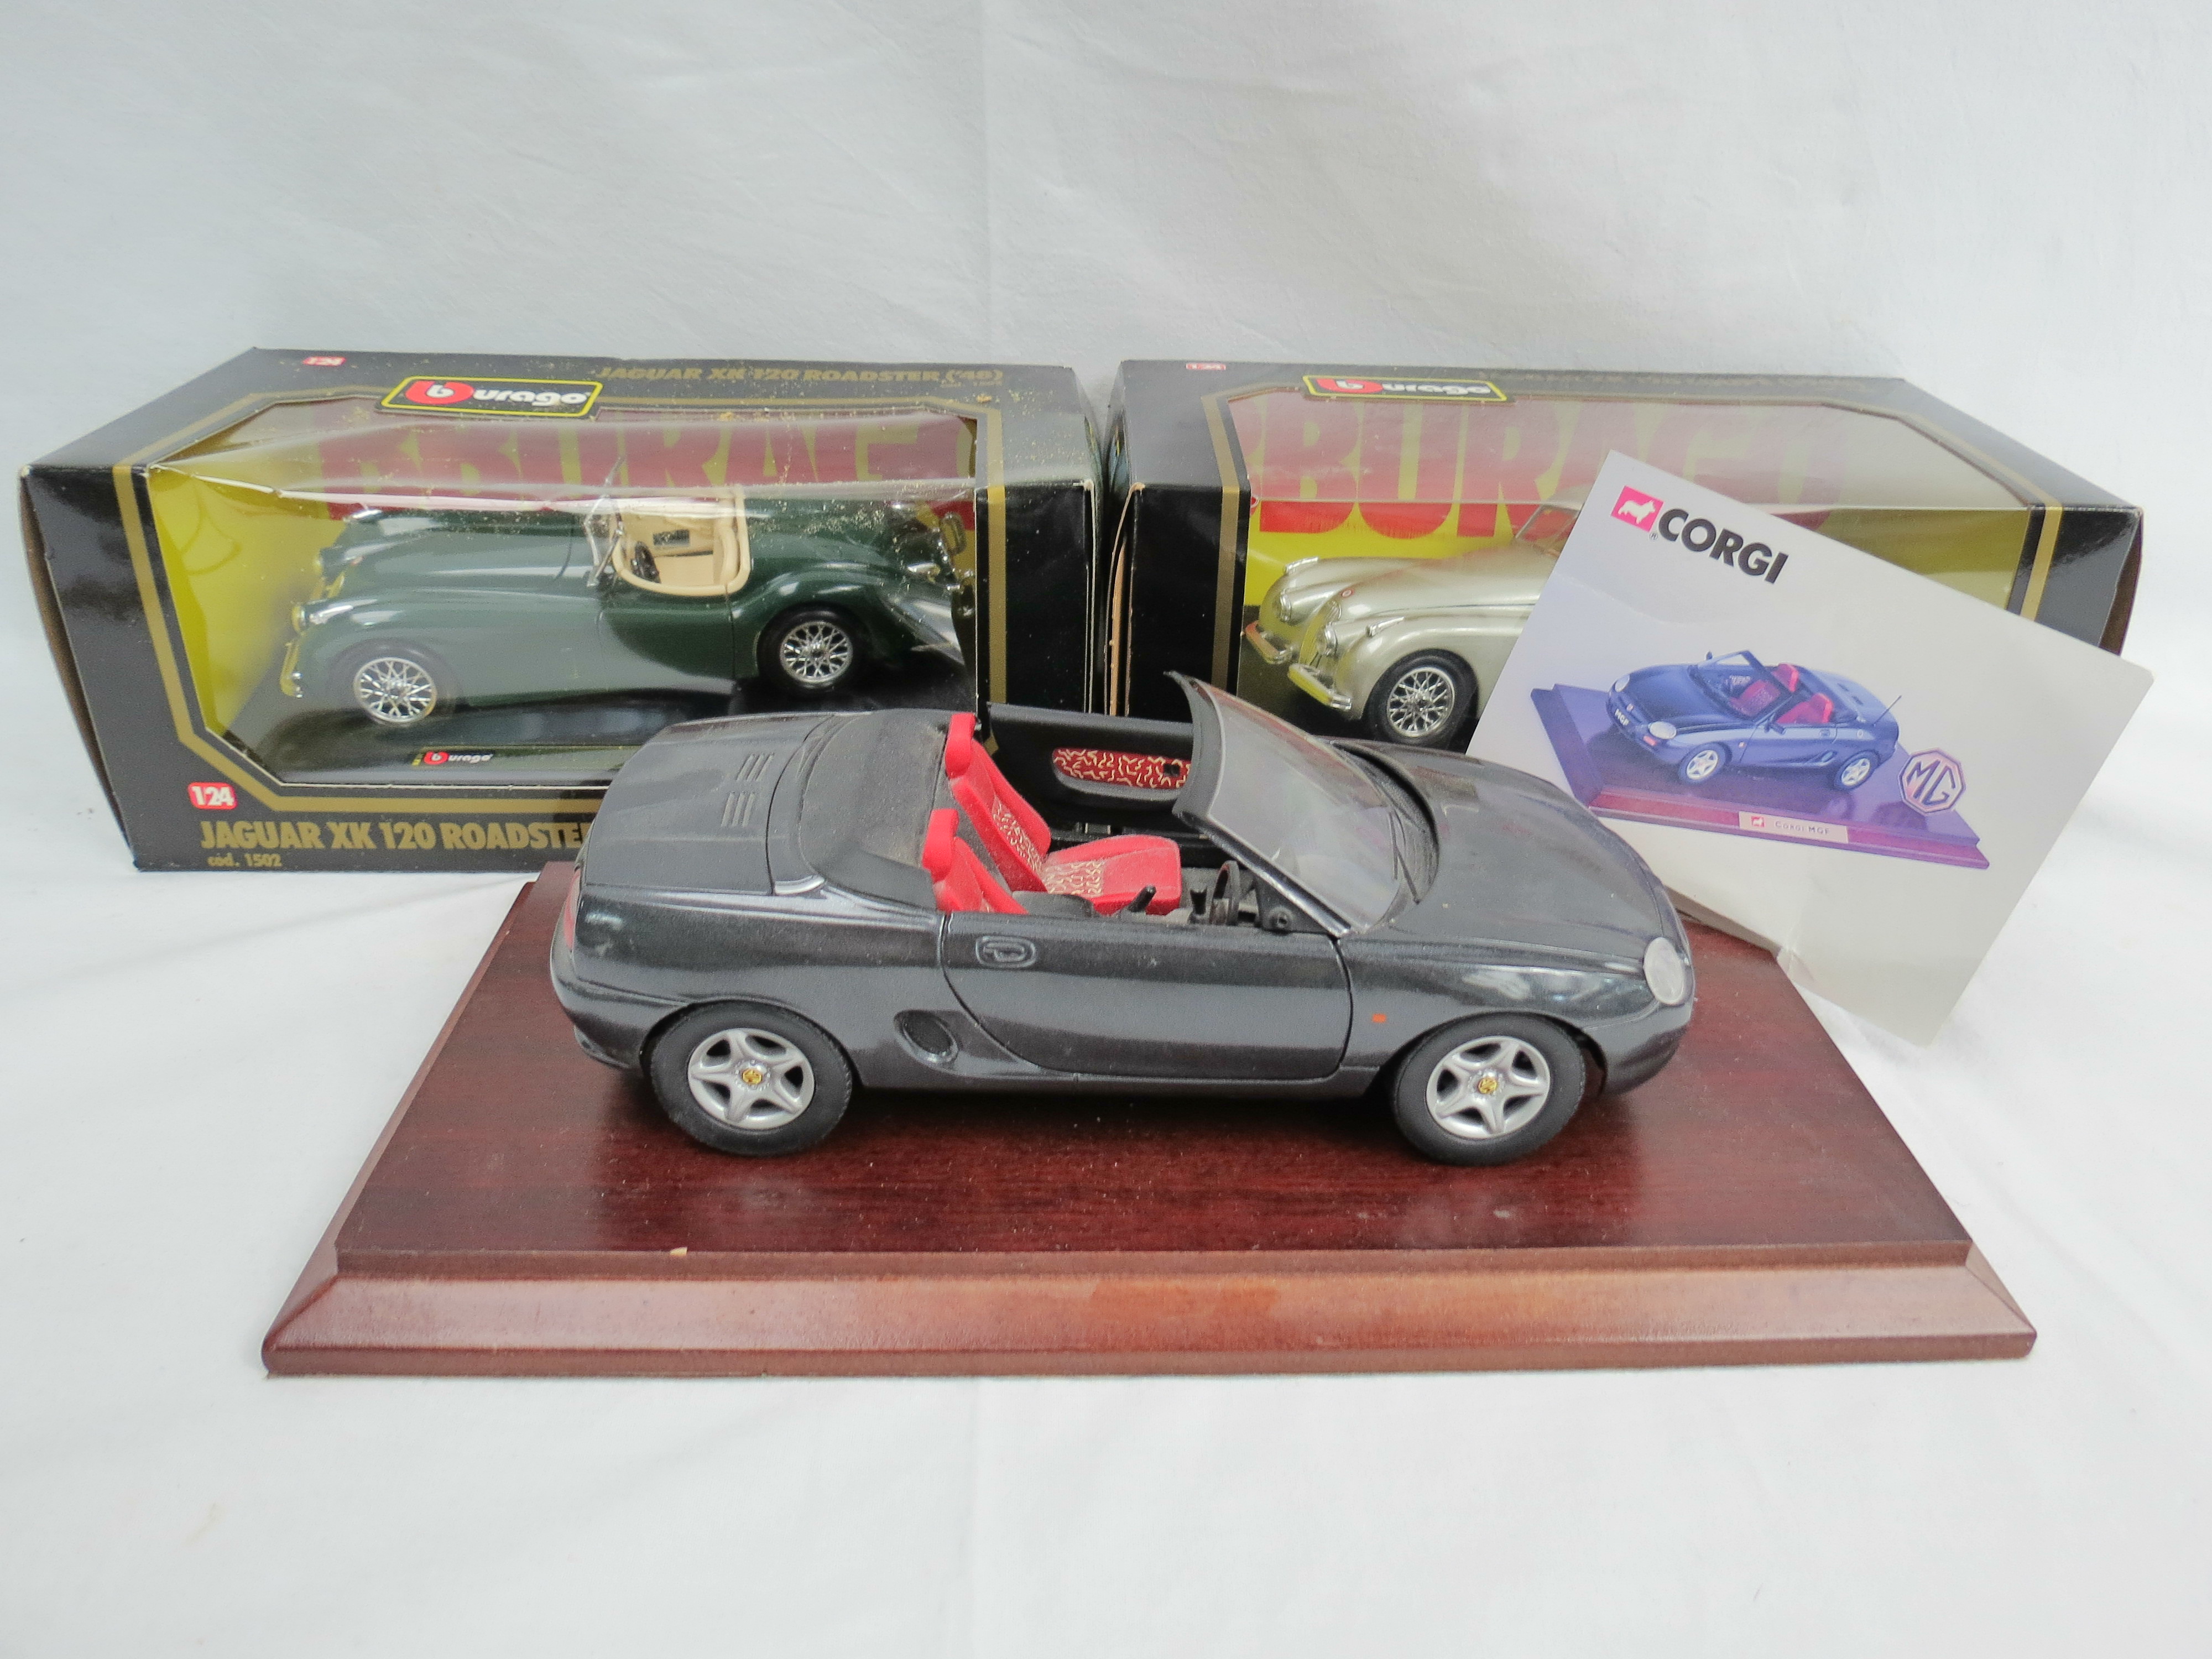 A Corgi 1:18 scale die-cast limited edition model of MG MGF on a wooden base together with two